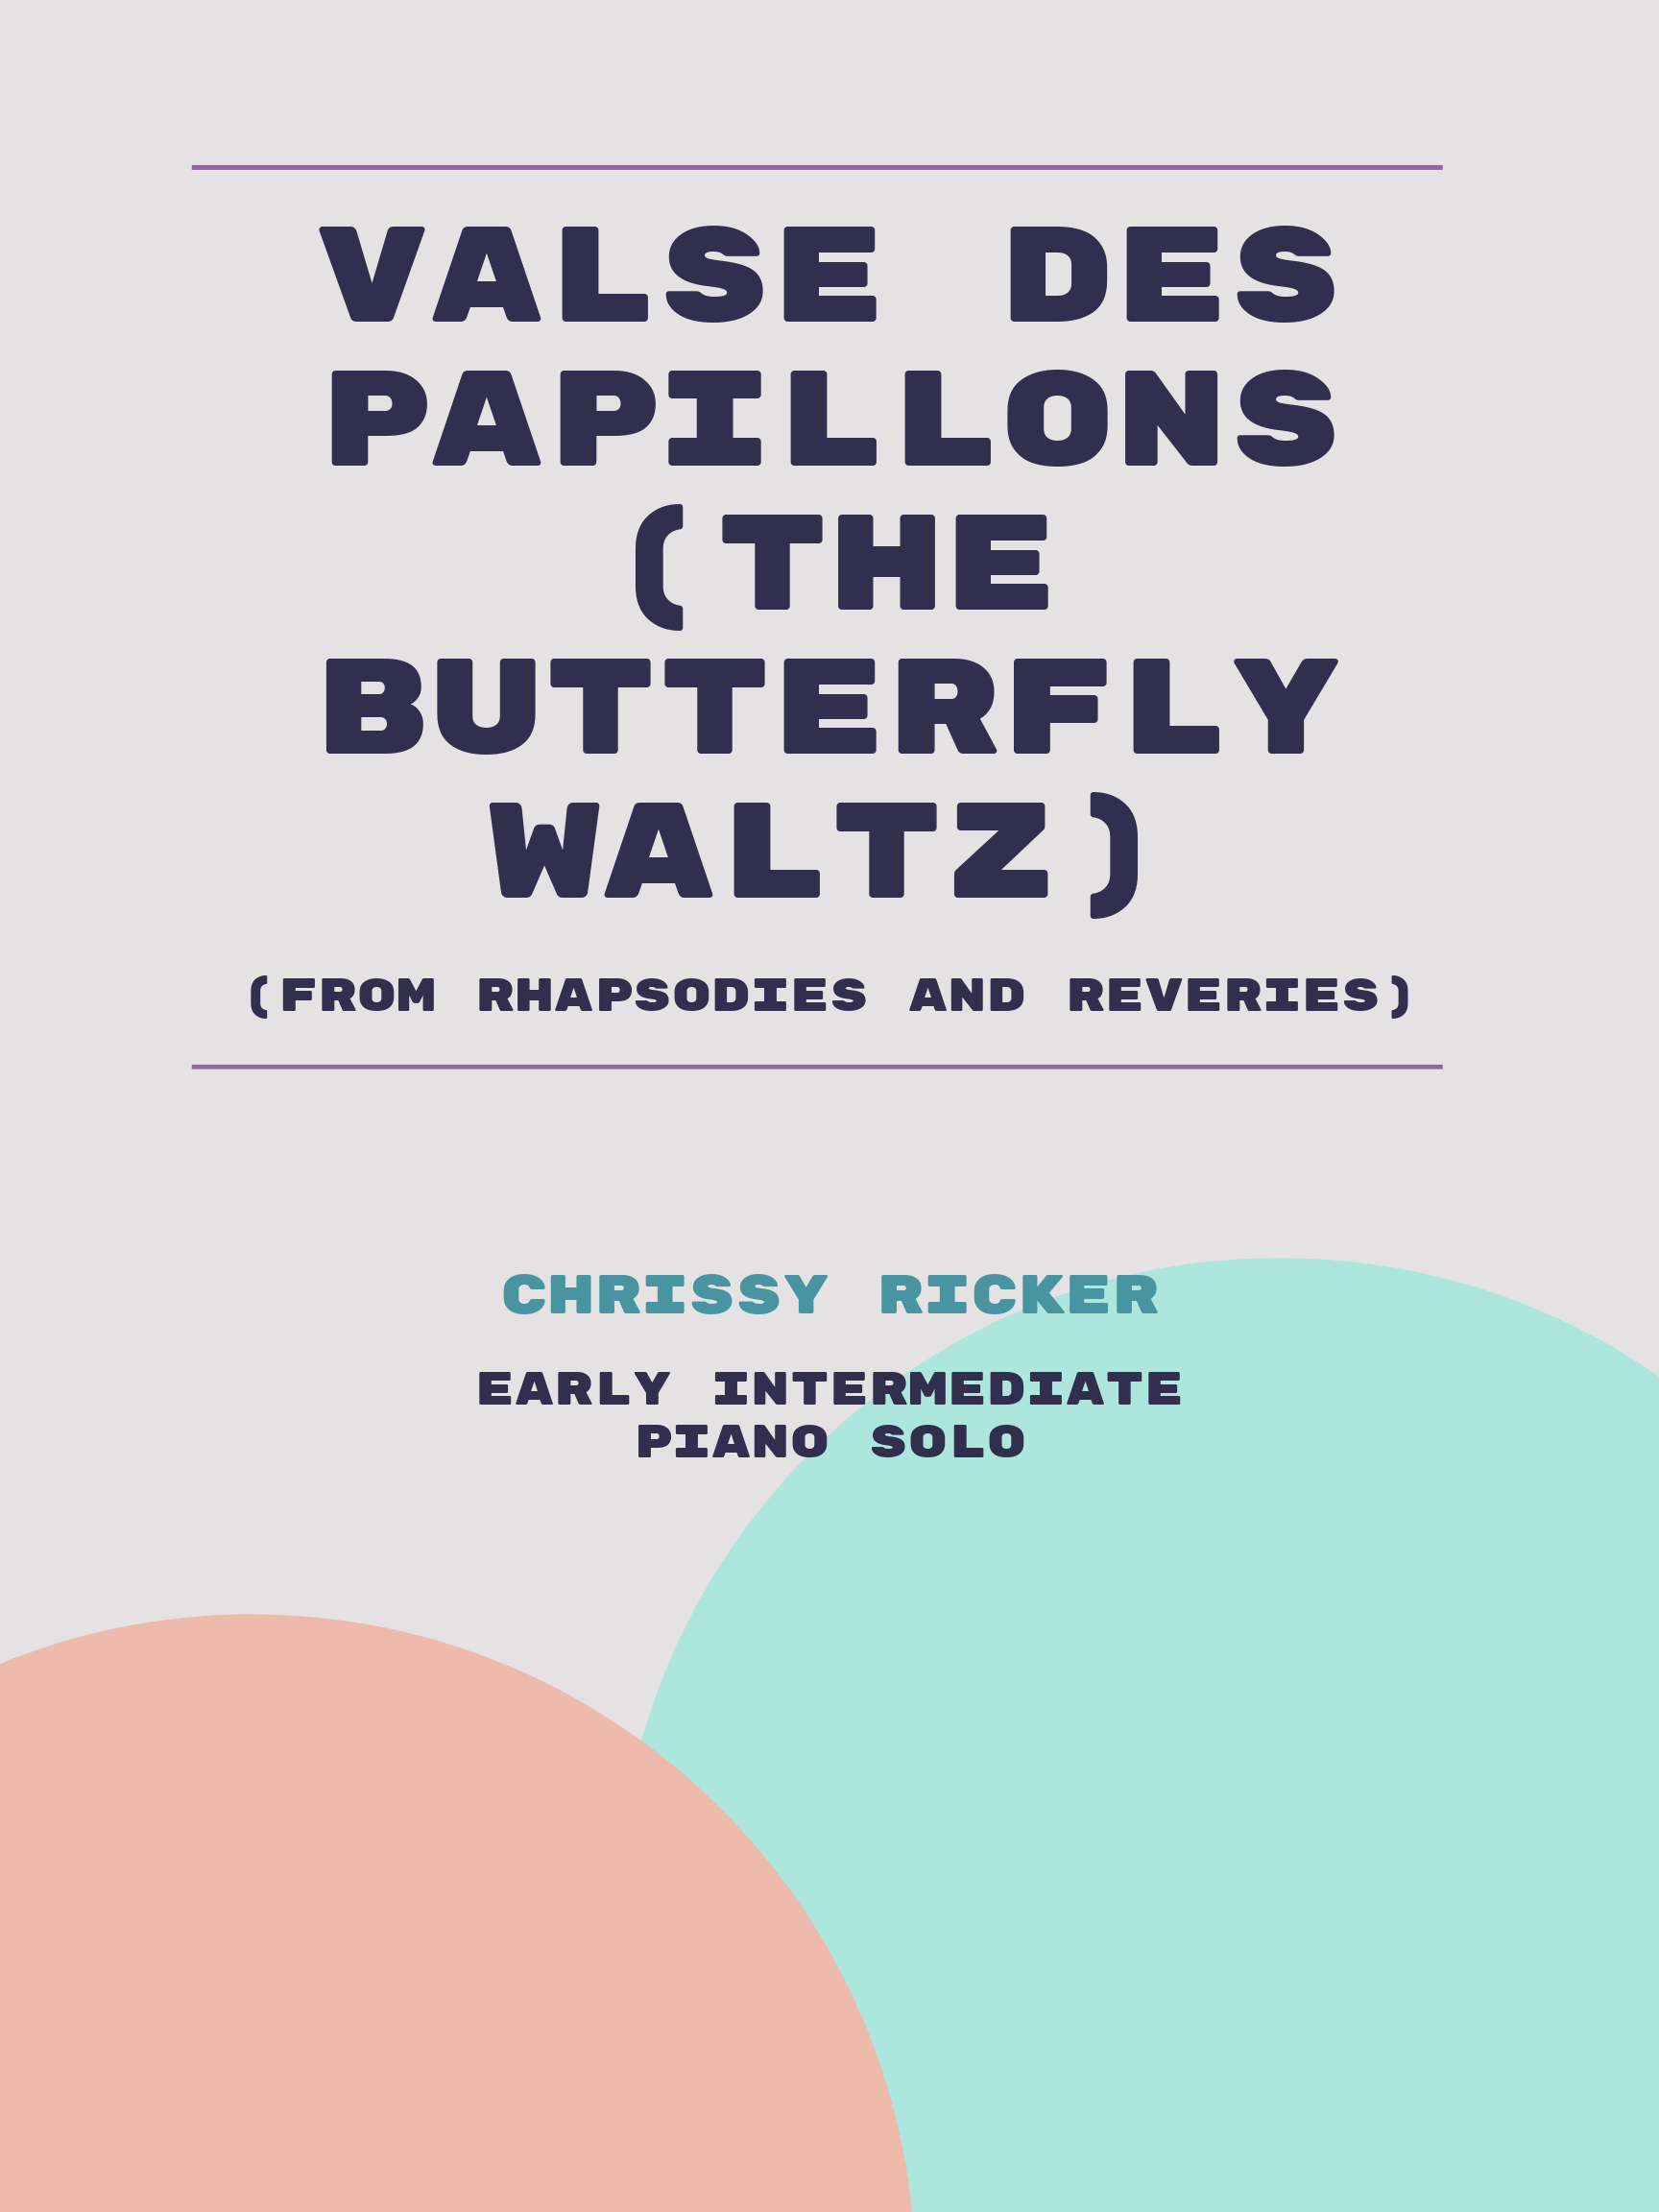 Valse des Papillons (The Butterfly Waltz) by Chrissy Ricker